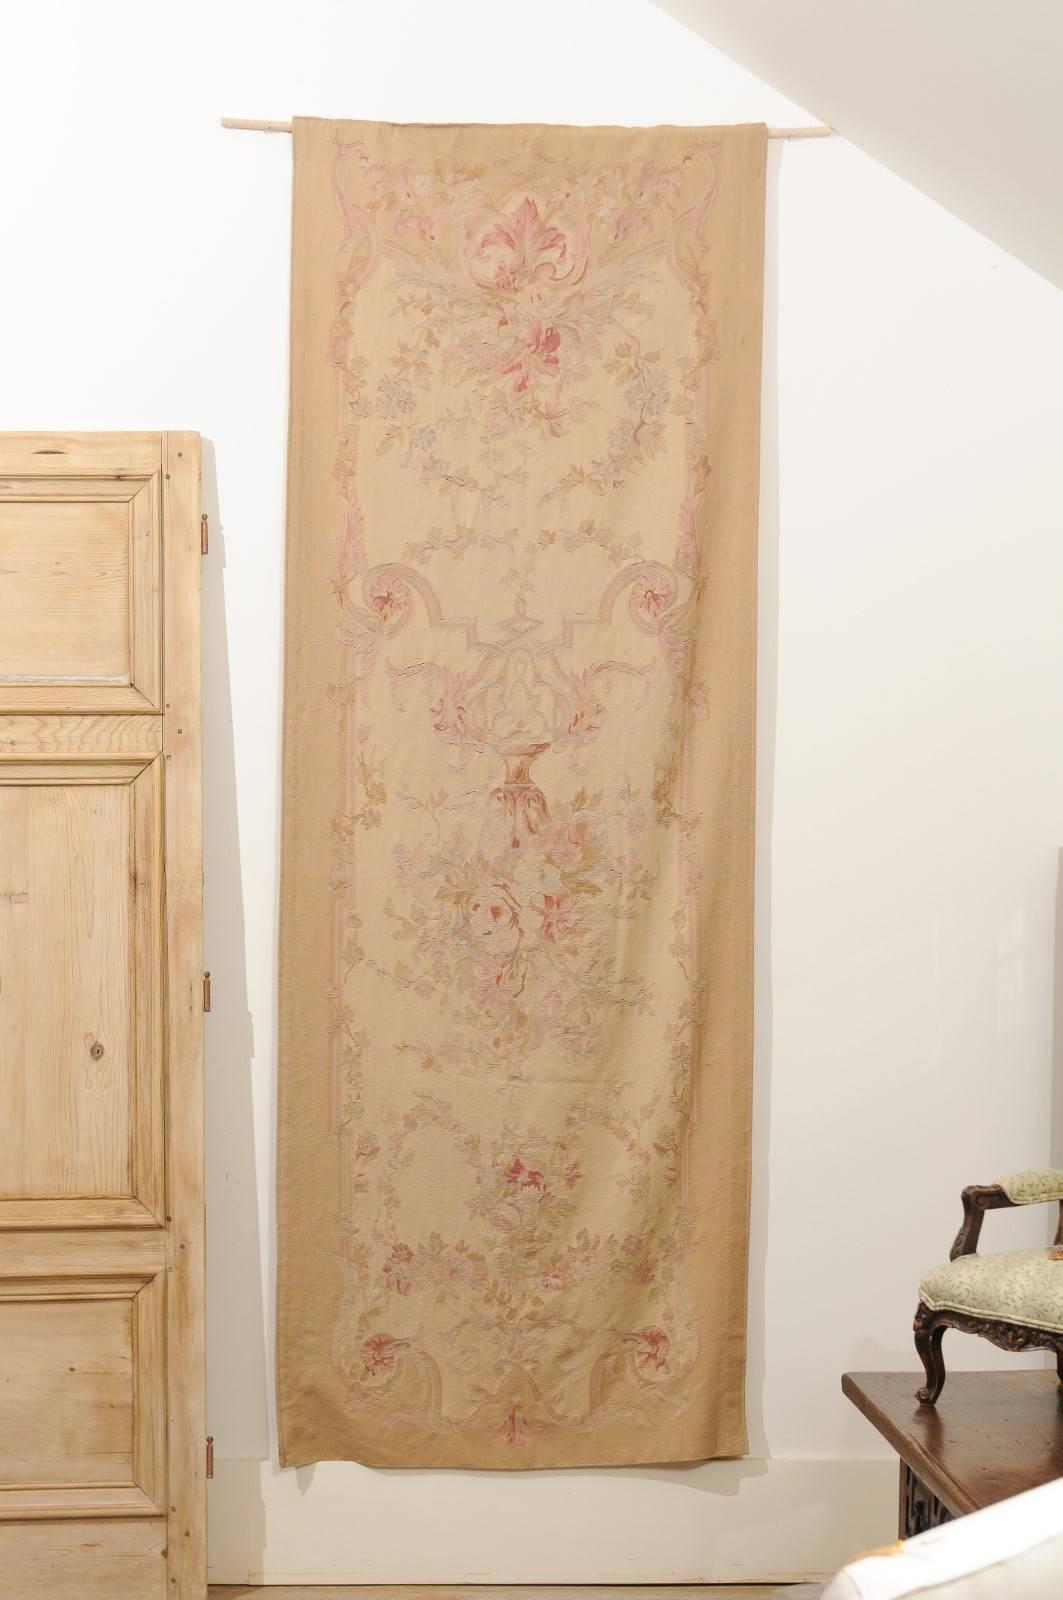 A French handwoven vertical tapestry from the 19th century, with soft muted colors and floral décor, lined and backed with a hanging sleeve. This exquisite French tapestry features a tall Silhouette, beautifully adorned with floral motifs standing